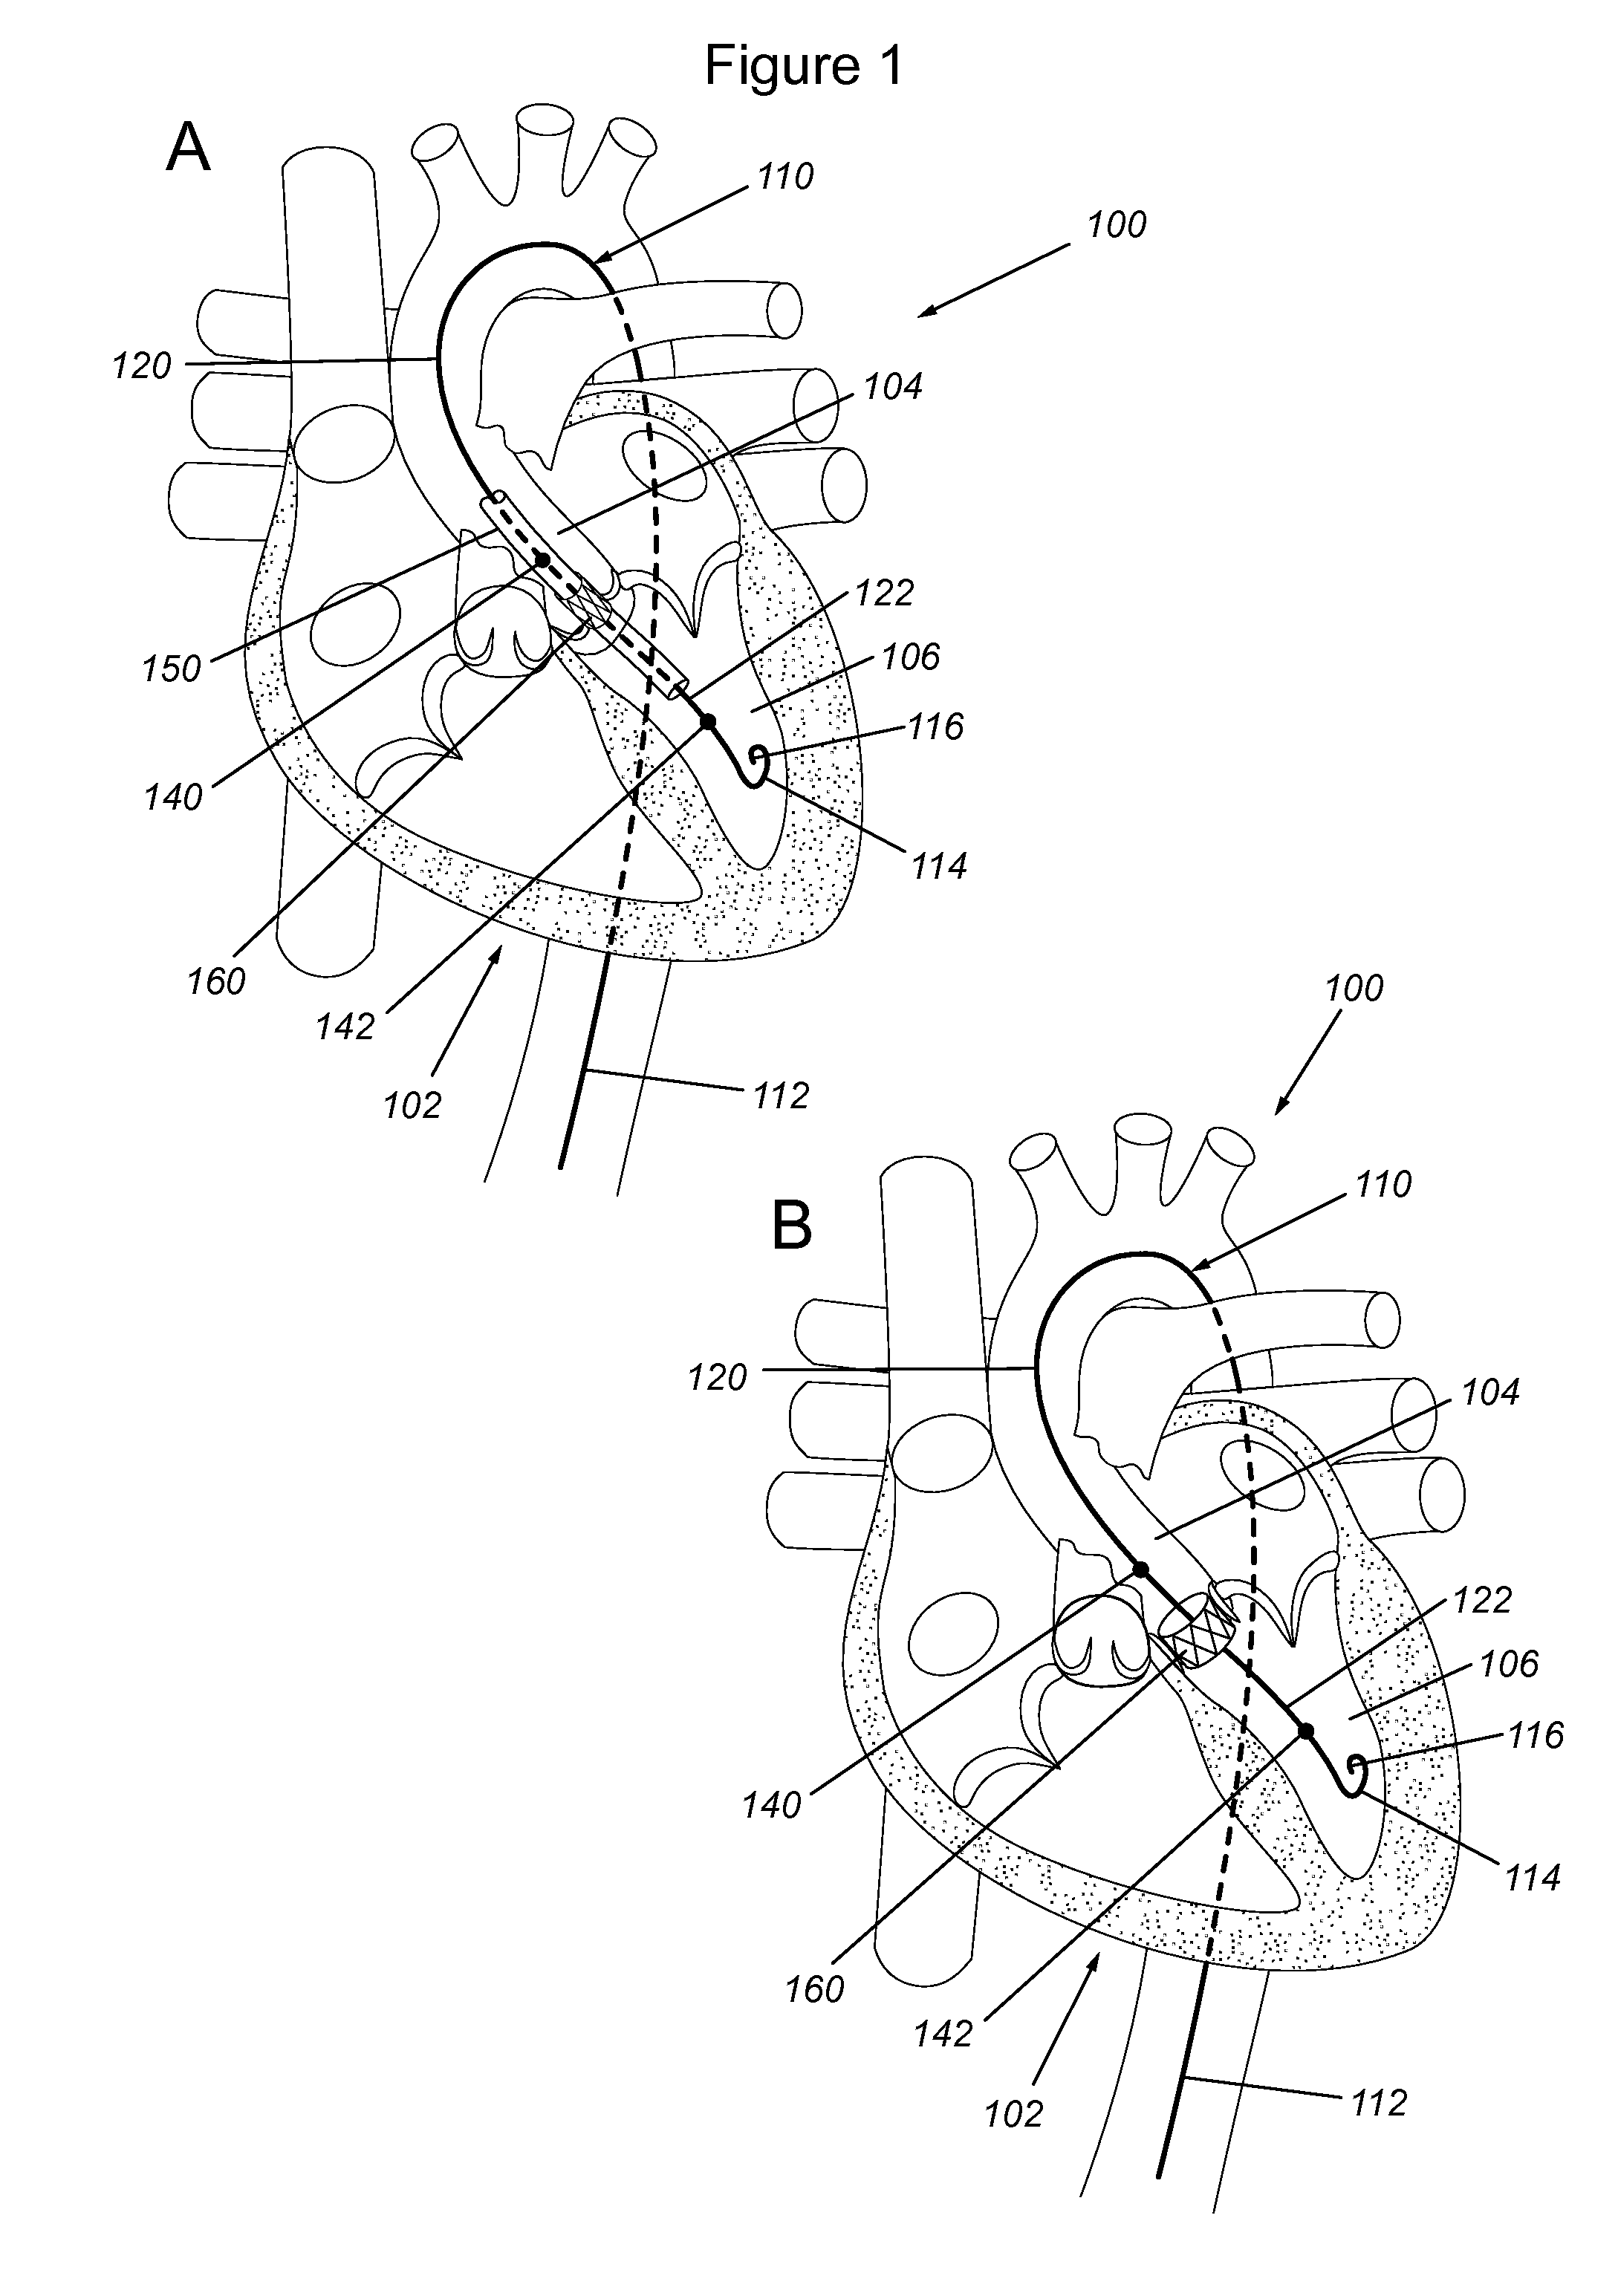 Transcatheter aortic valve implantation pressure wires and uses thereof